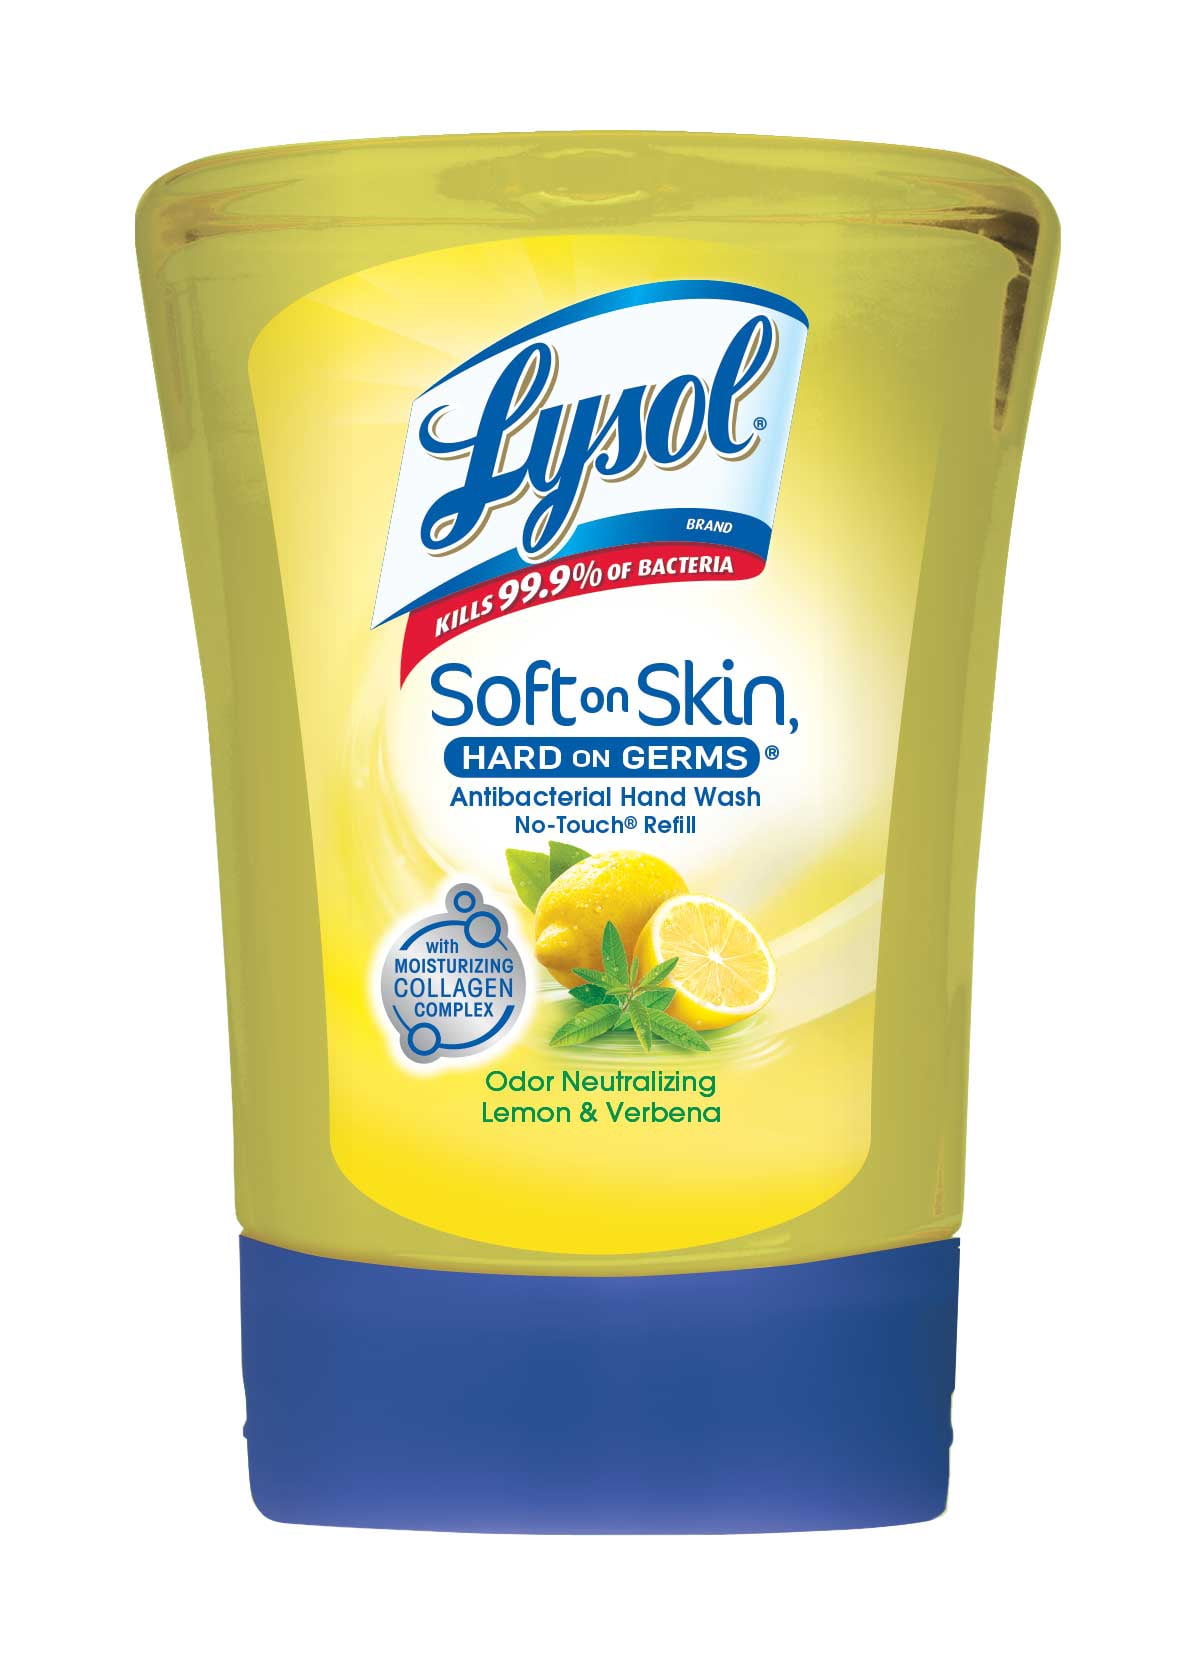 Refill With Your Favorite Hand Soap Save$$ Lysol No-Touch Refill Transfer Cap 